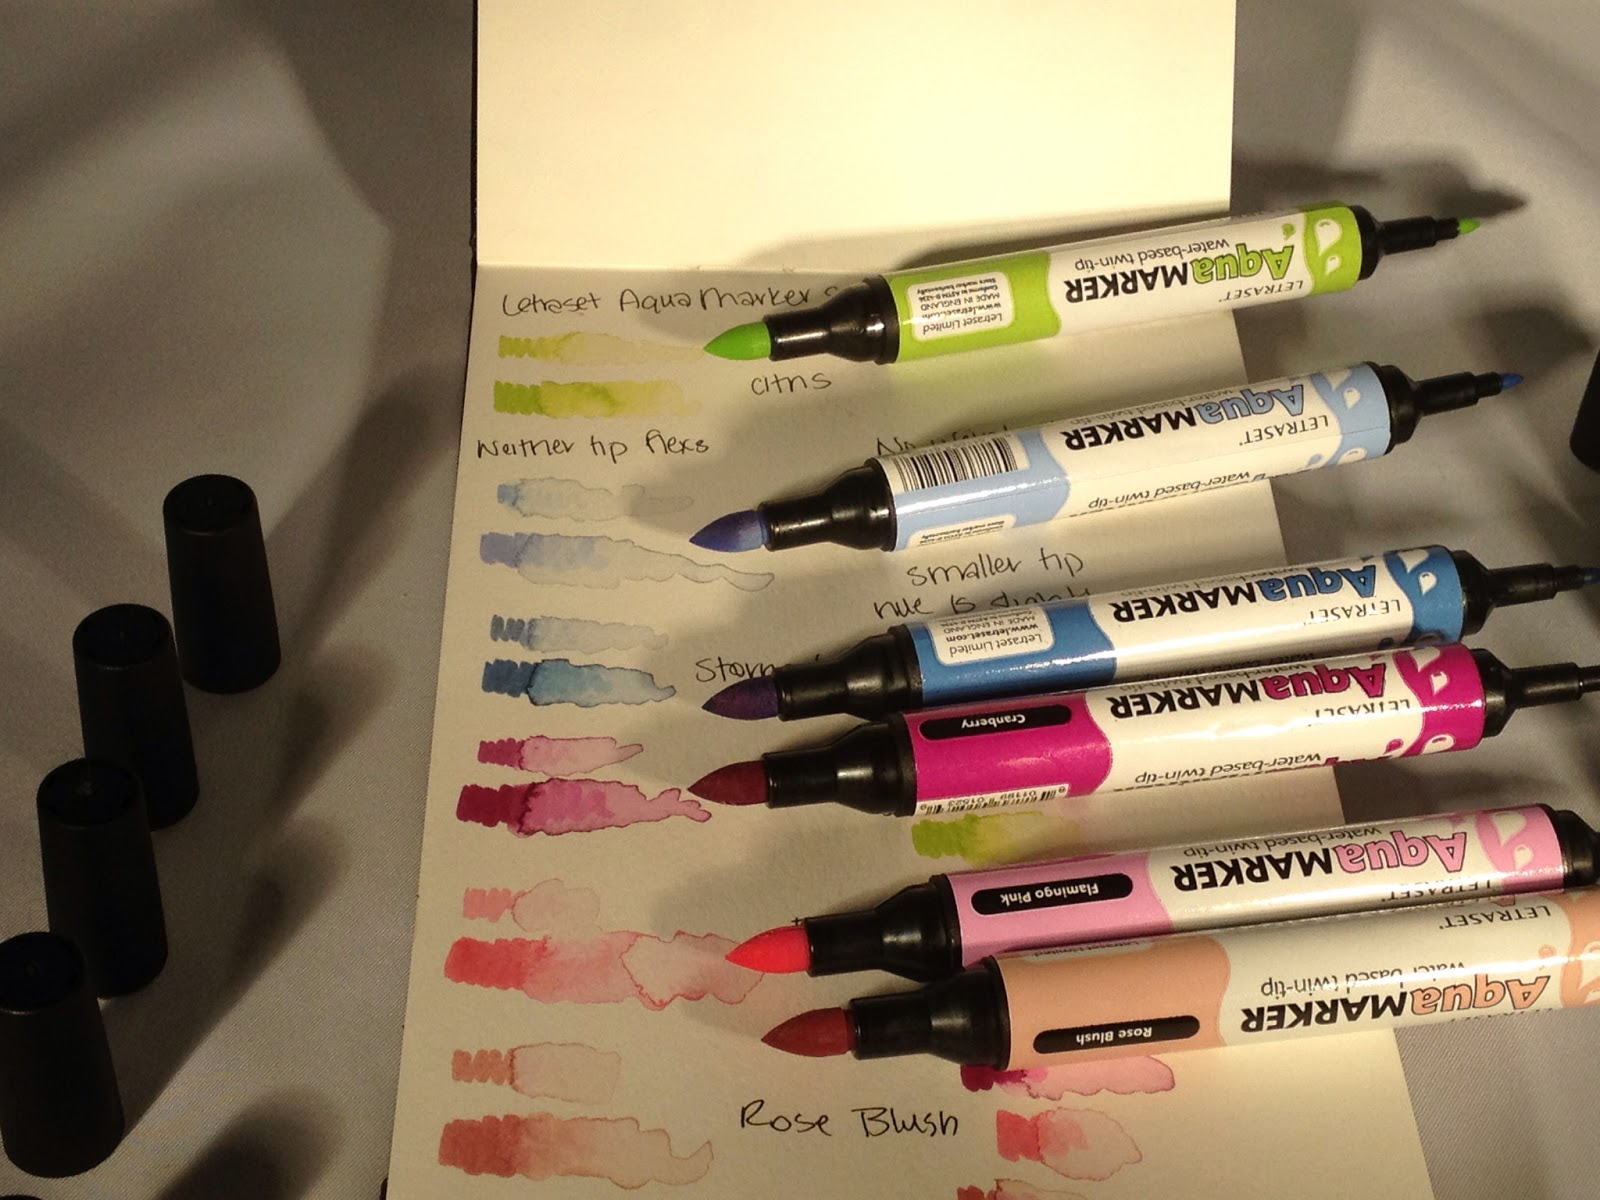 Watercolor Marker Review: Letraset's AquaMarkers